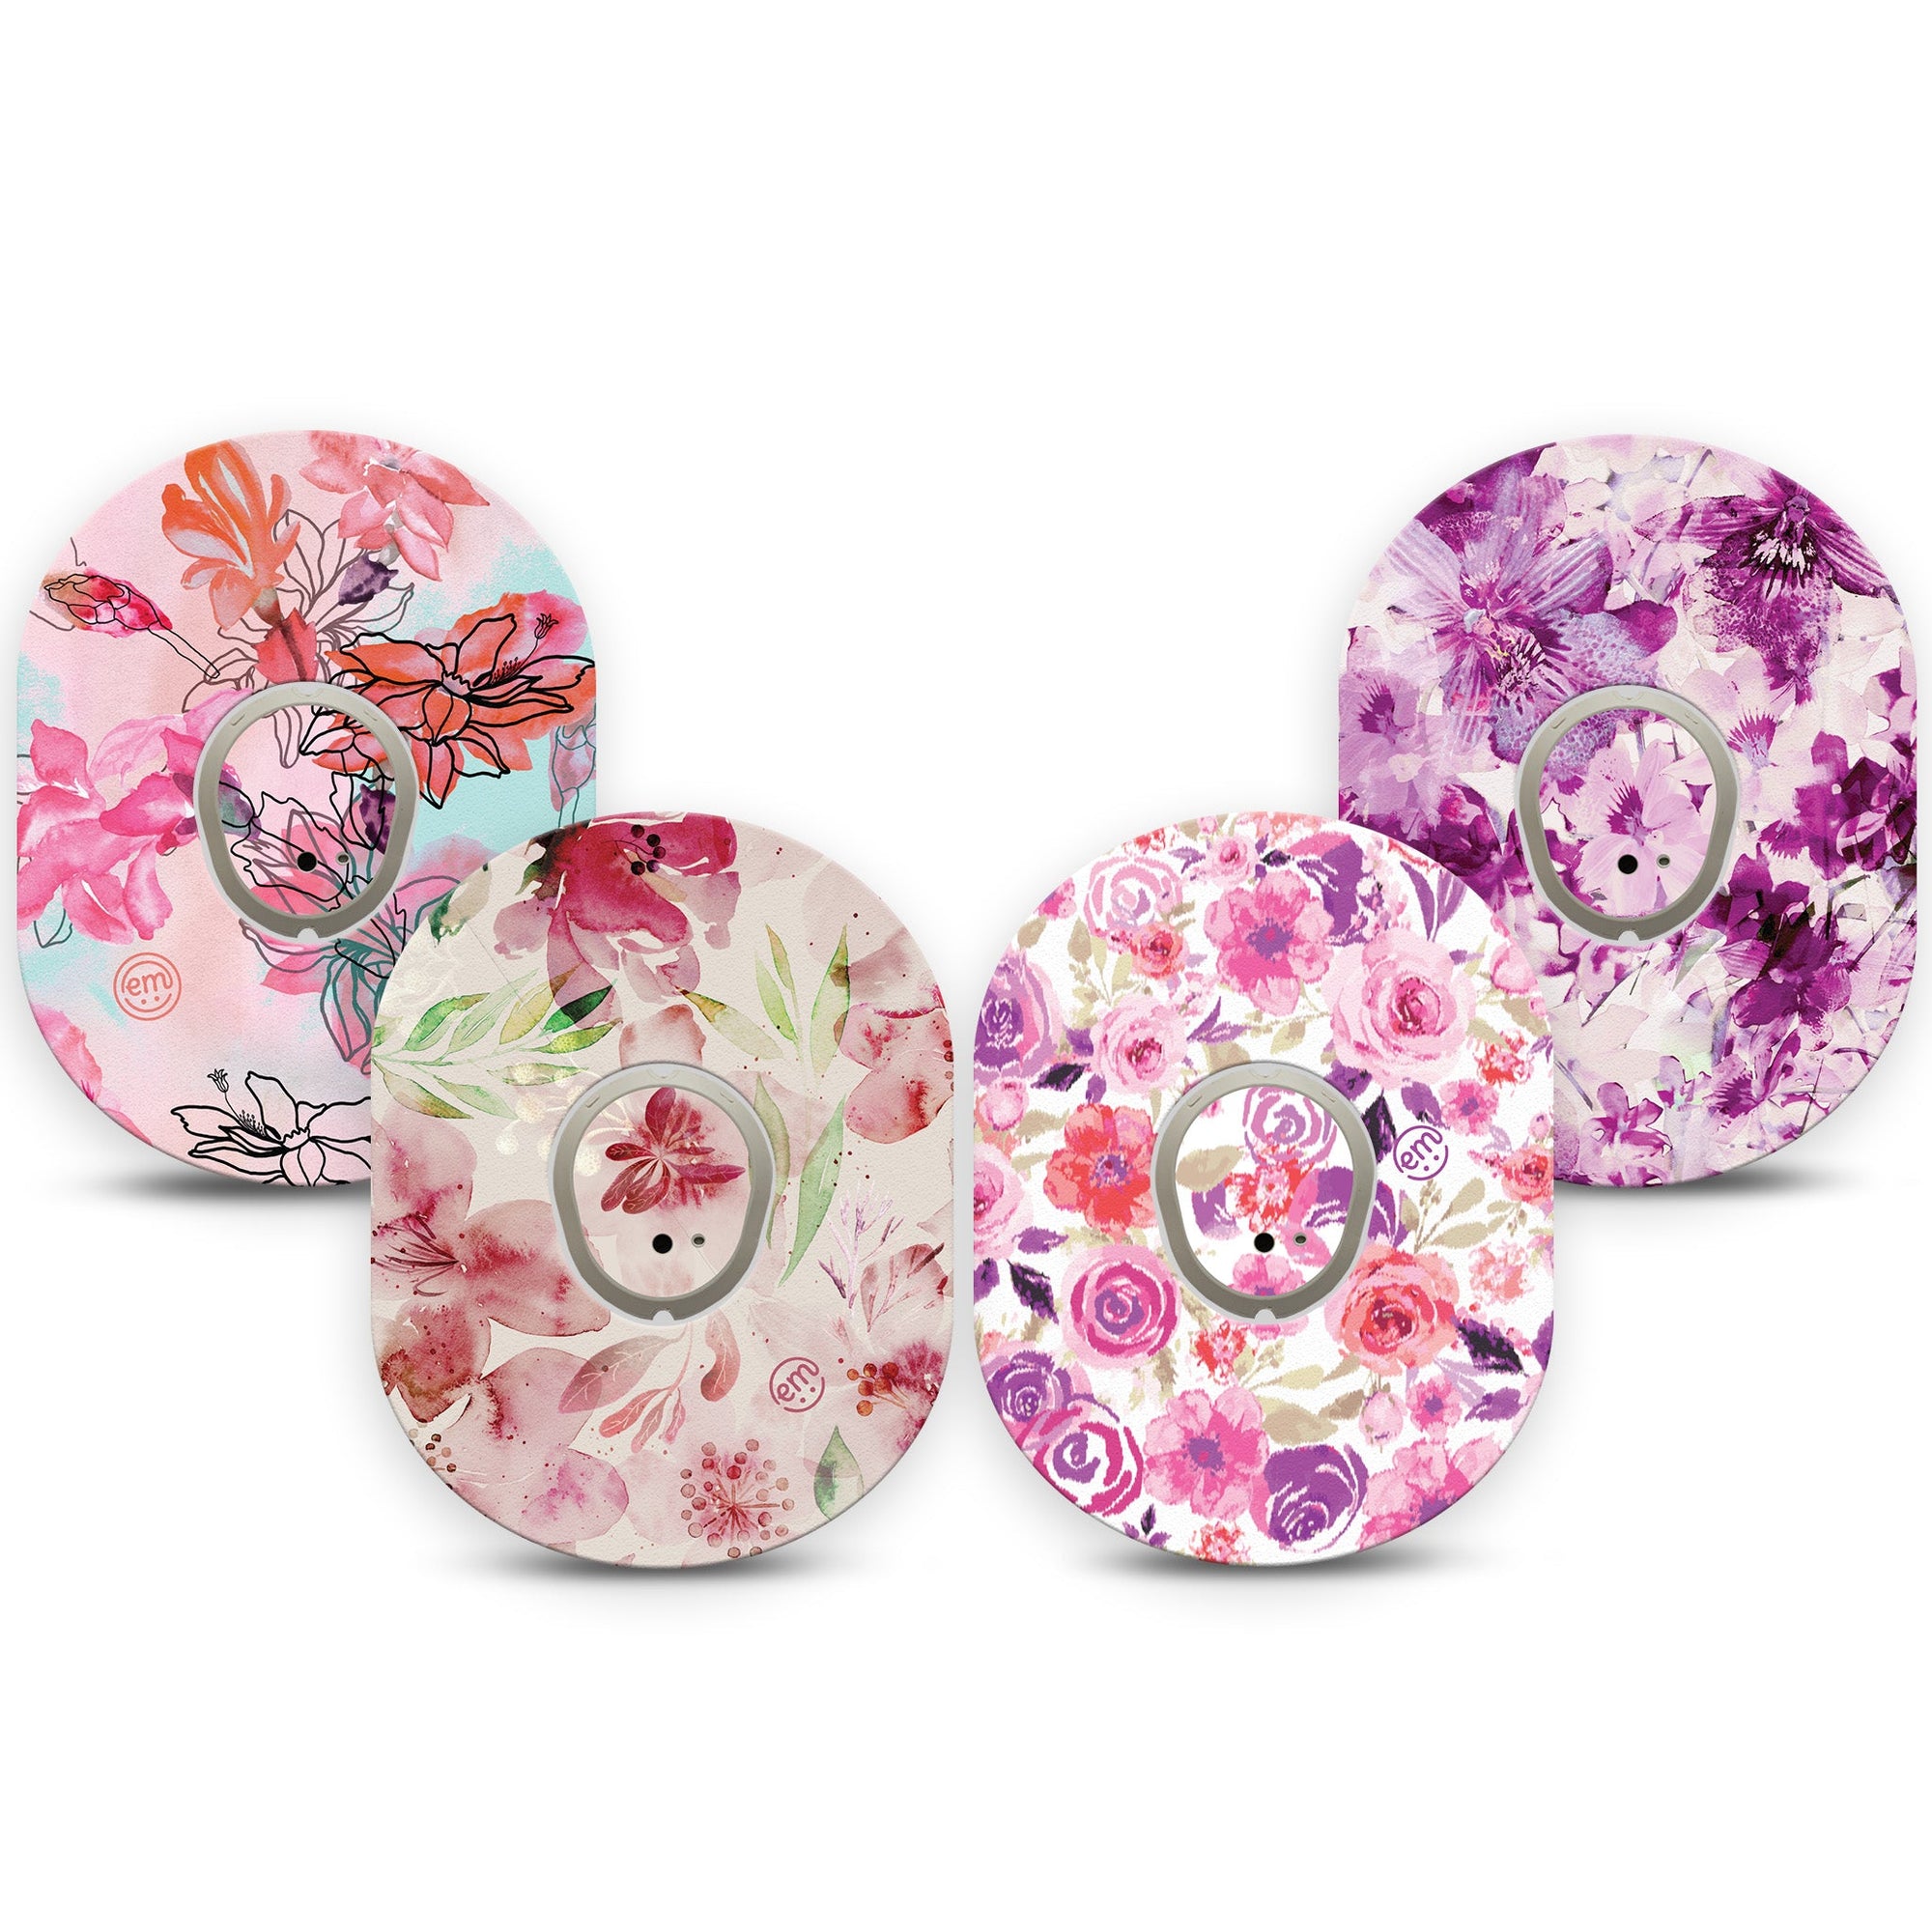 ExpressionMed Mixed Florals Variety Pack Dexcom G7 8-Pack Blossoming pink flowers Overlay Tape Continuous Glucose Monitor Design, Dexcom Stelo Glucose Biosensor System